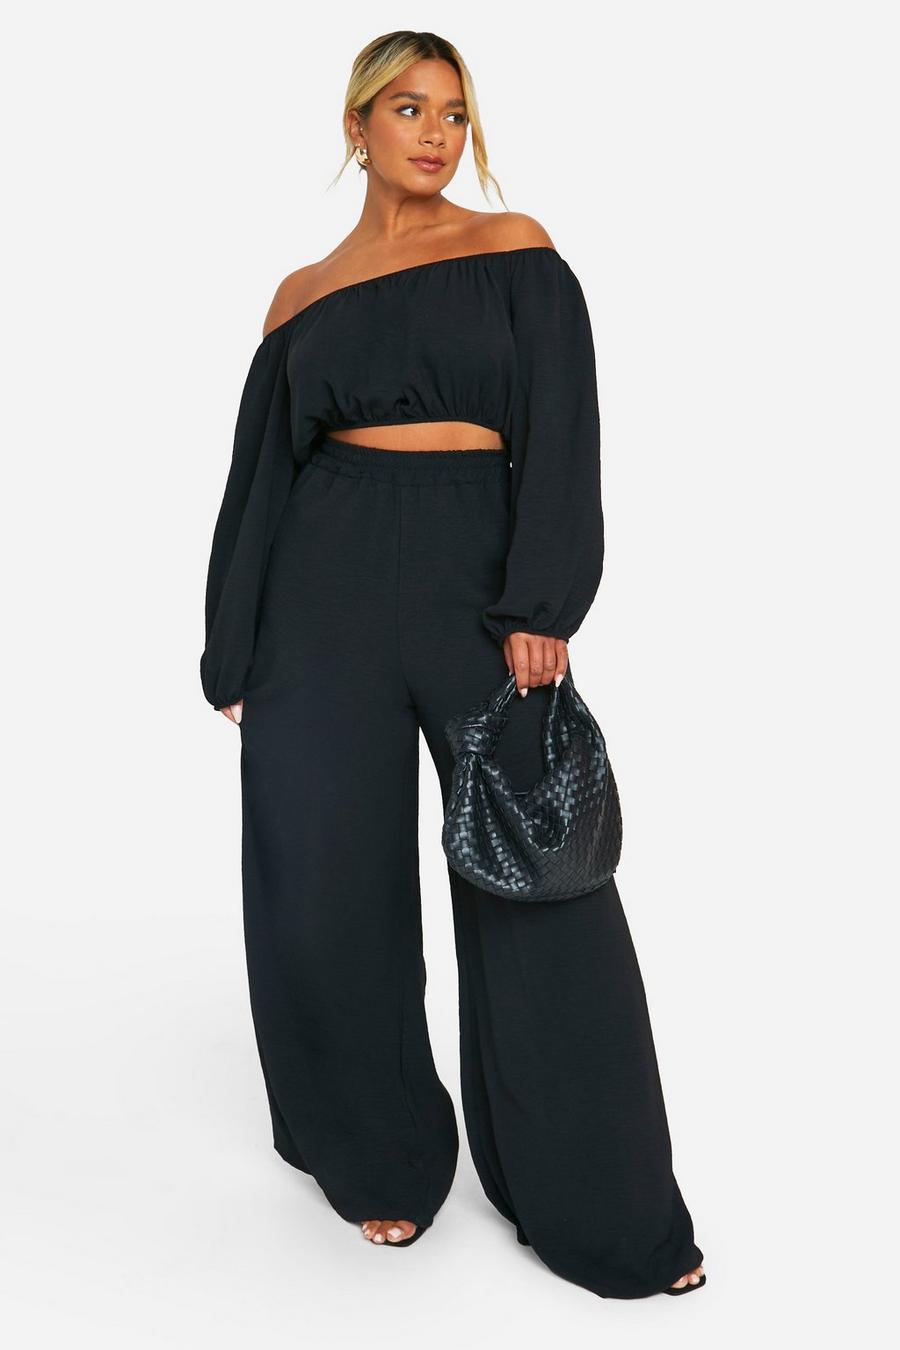 Black Plus Textured Bardot Top And Relaxed Fit Trouser image number 1